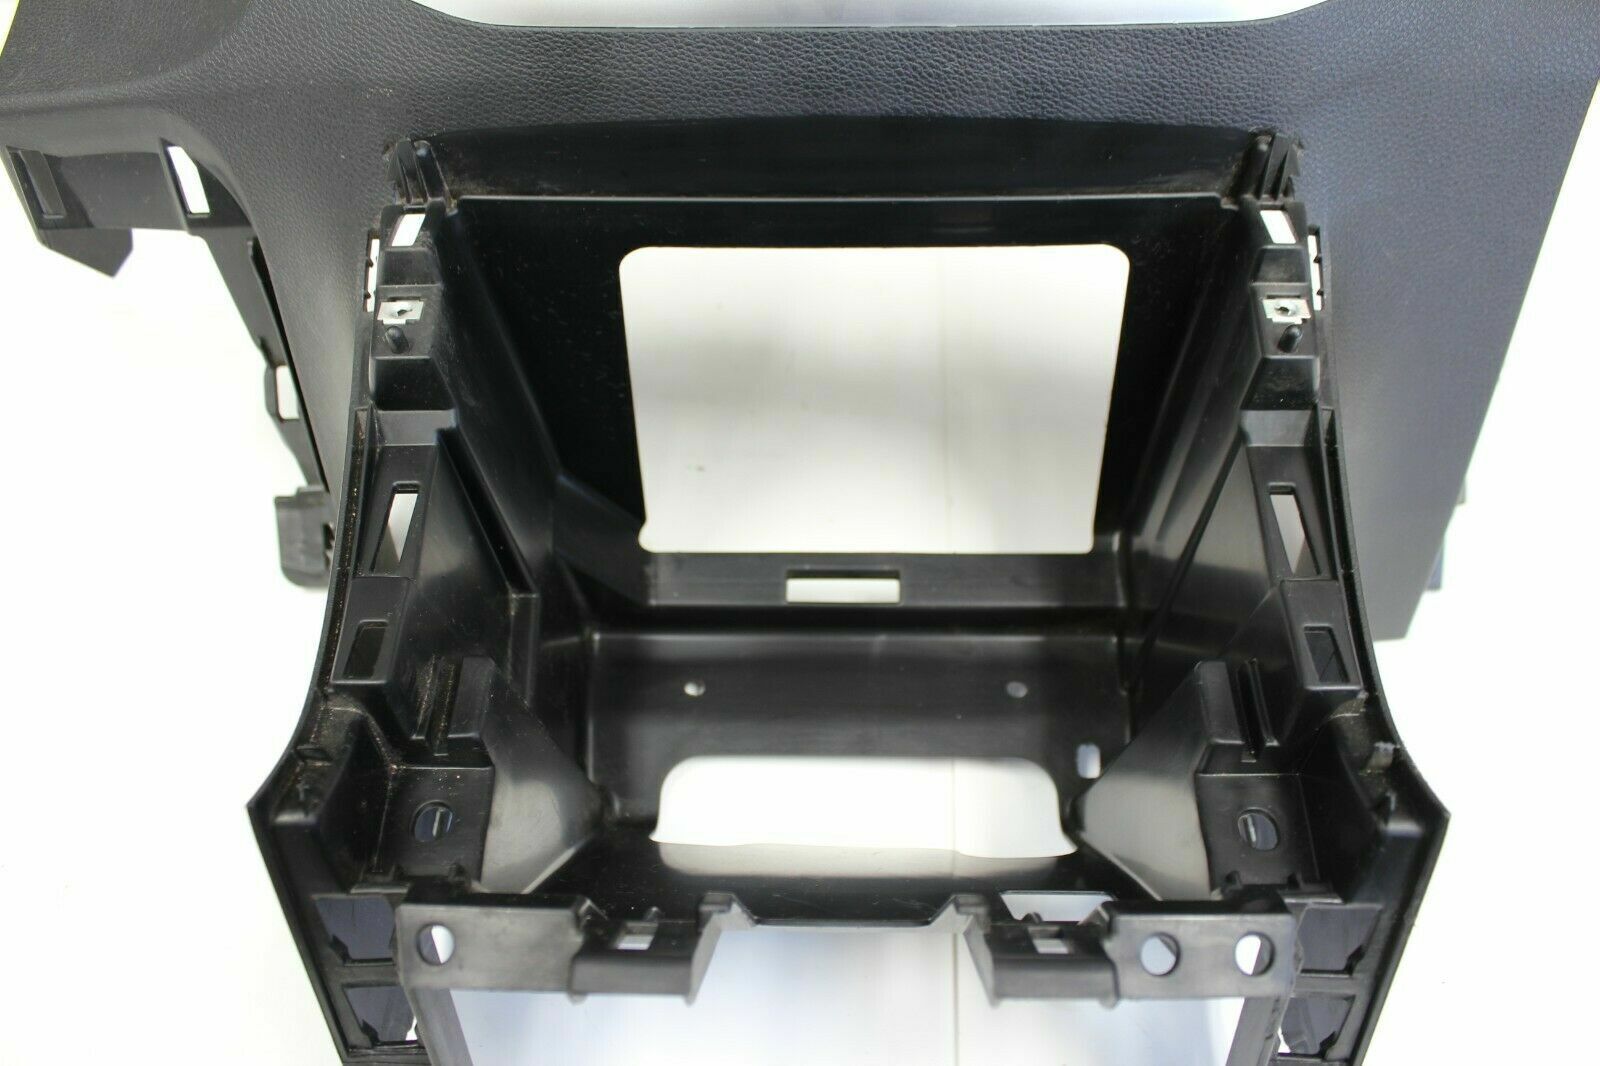 13-15 ACCORD FRONT CONSOLE CUBBY TRIM WITH CLIMATE CONTROLS OEM